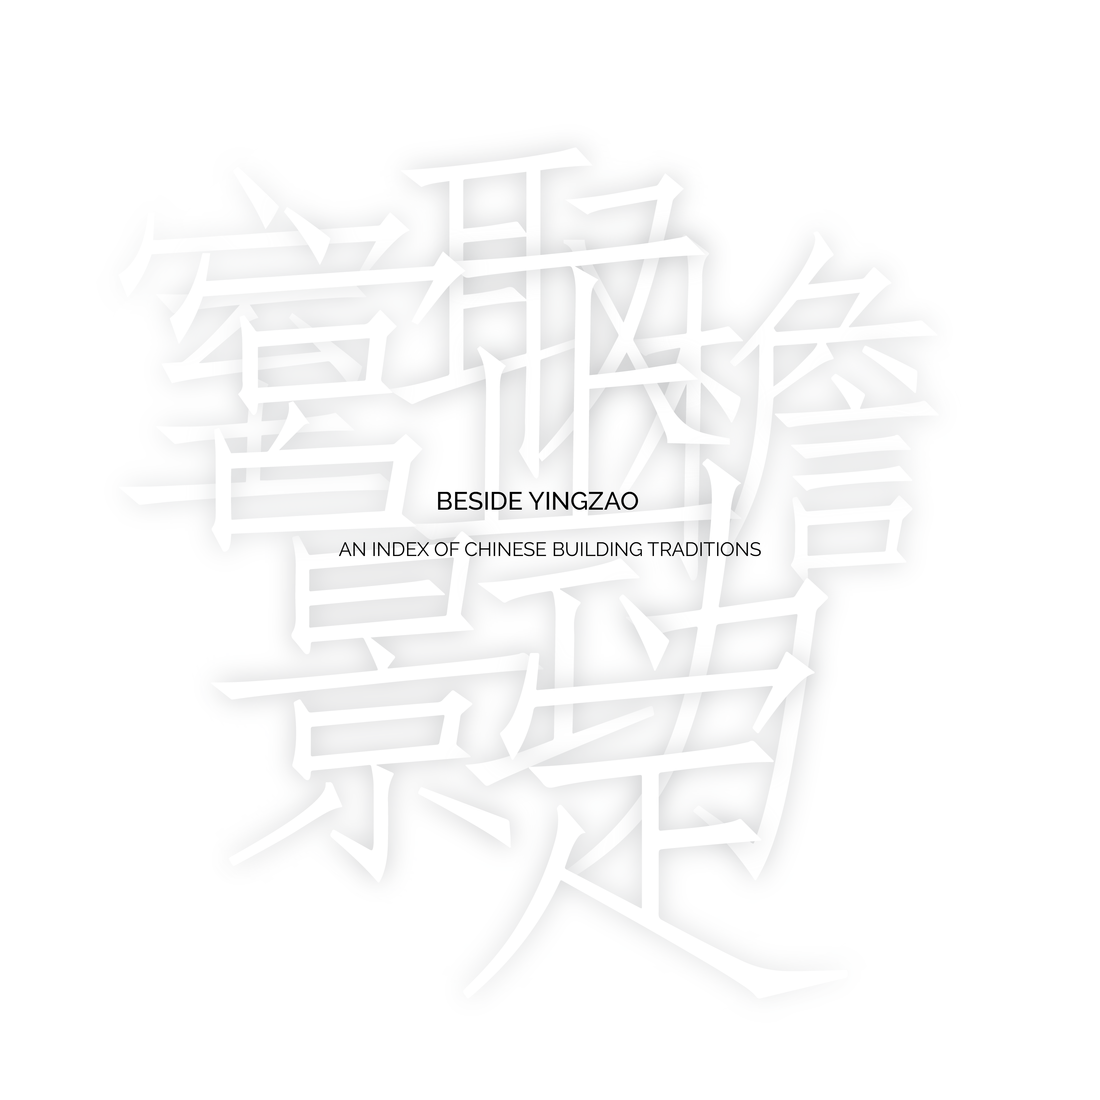 Tianyi Hang Beside Yingzao Cover Image 2022 - Graphic by Charis Armstrong